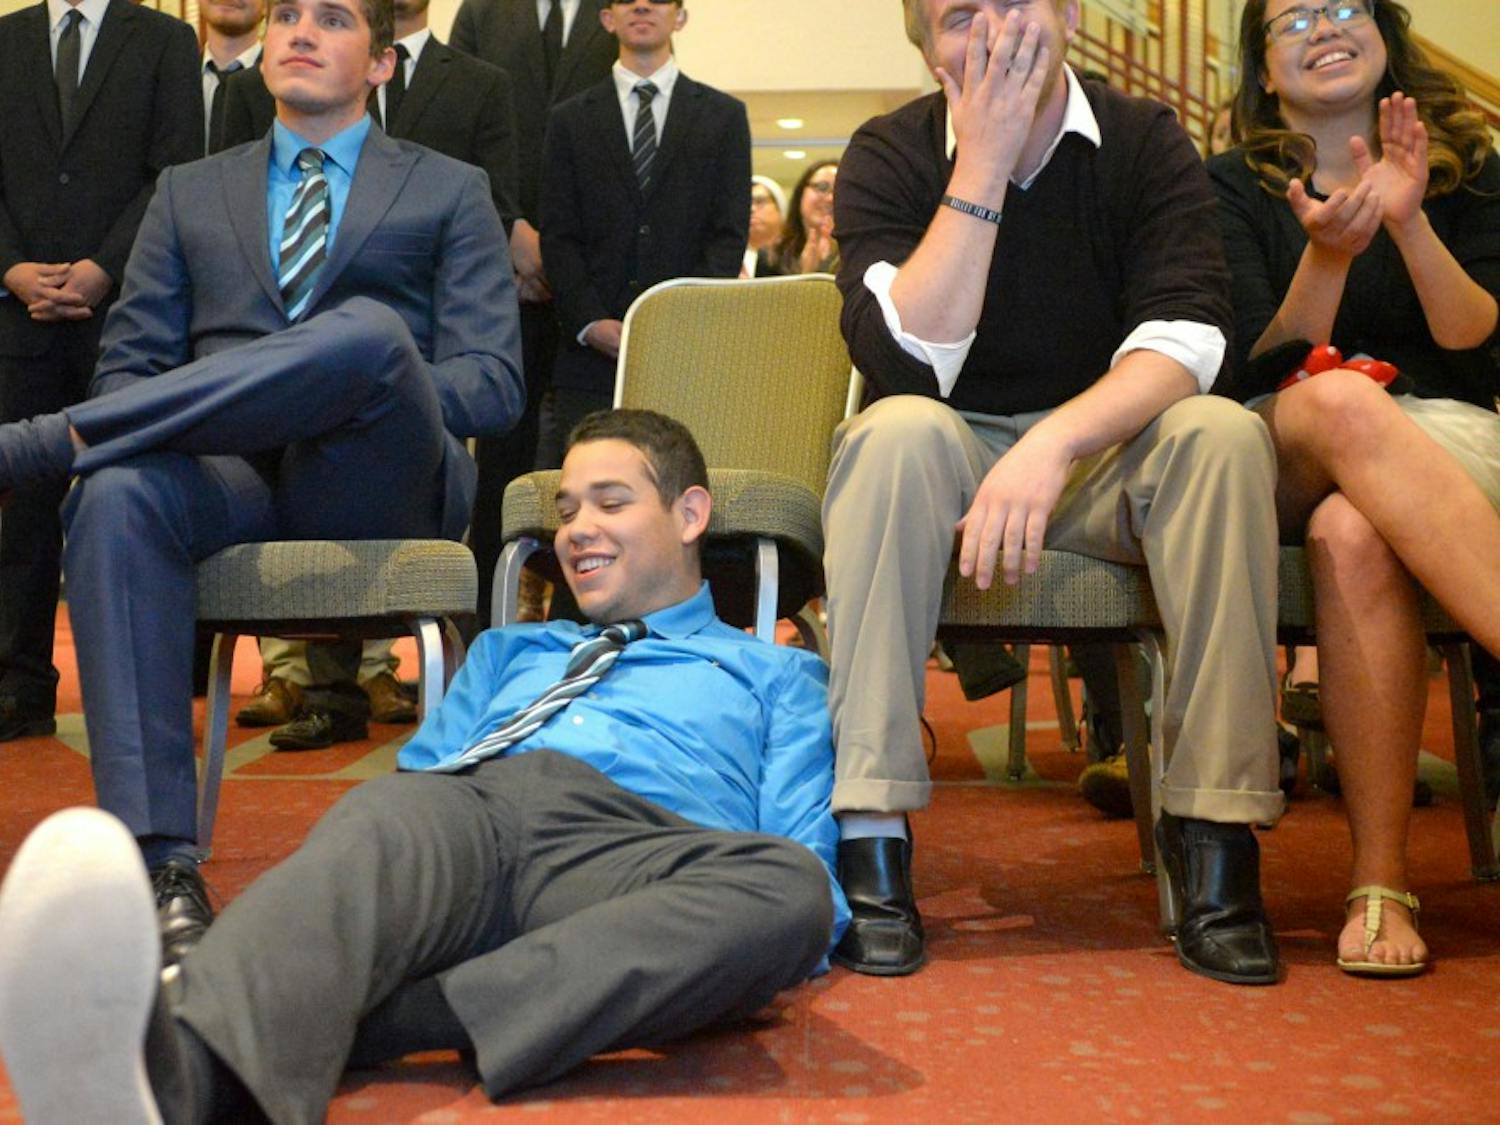 Jorge Guerrero falls out of his chair upon hearing he is reelected to the ASUNM Senate.